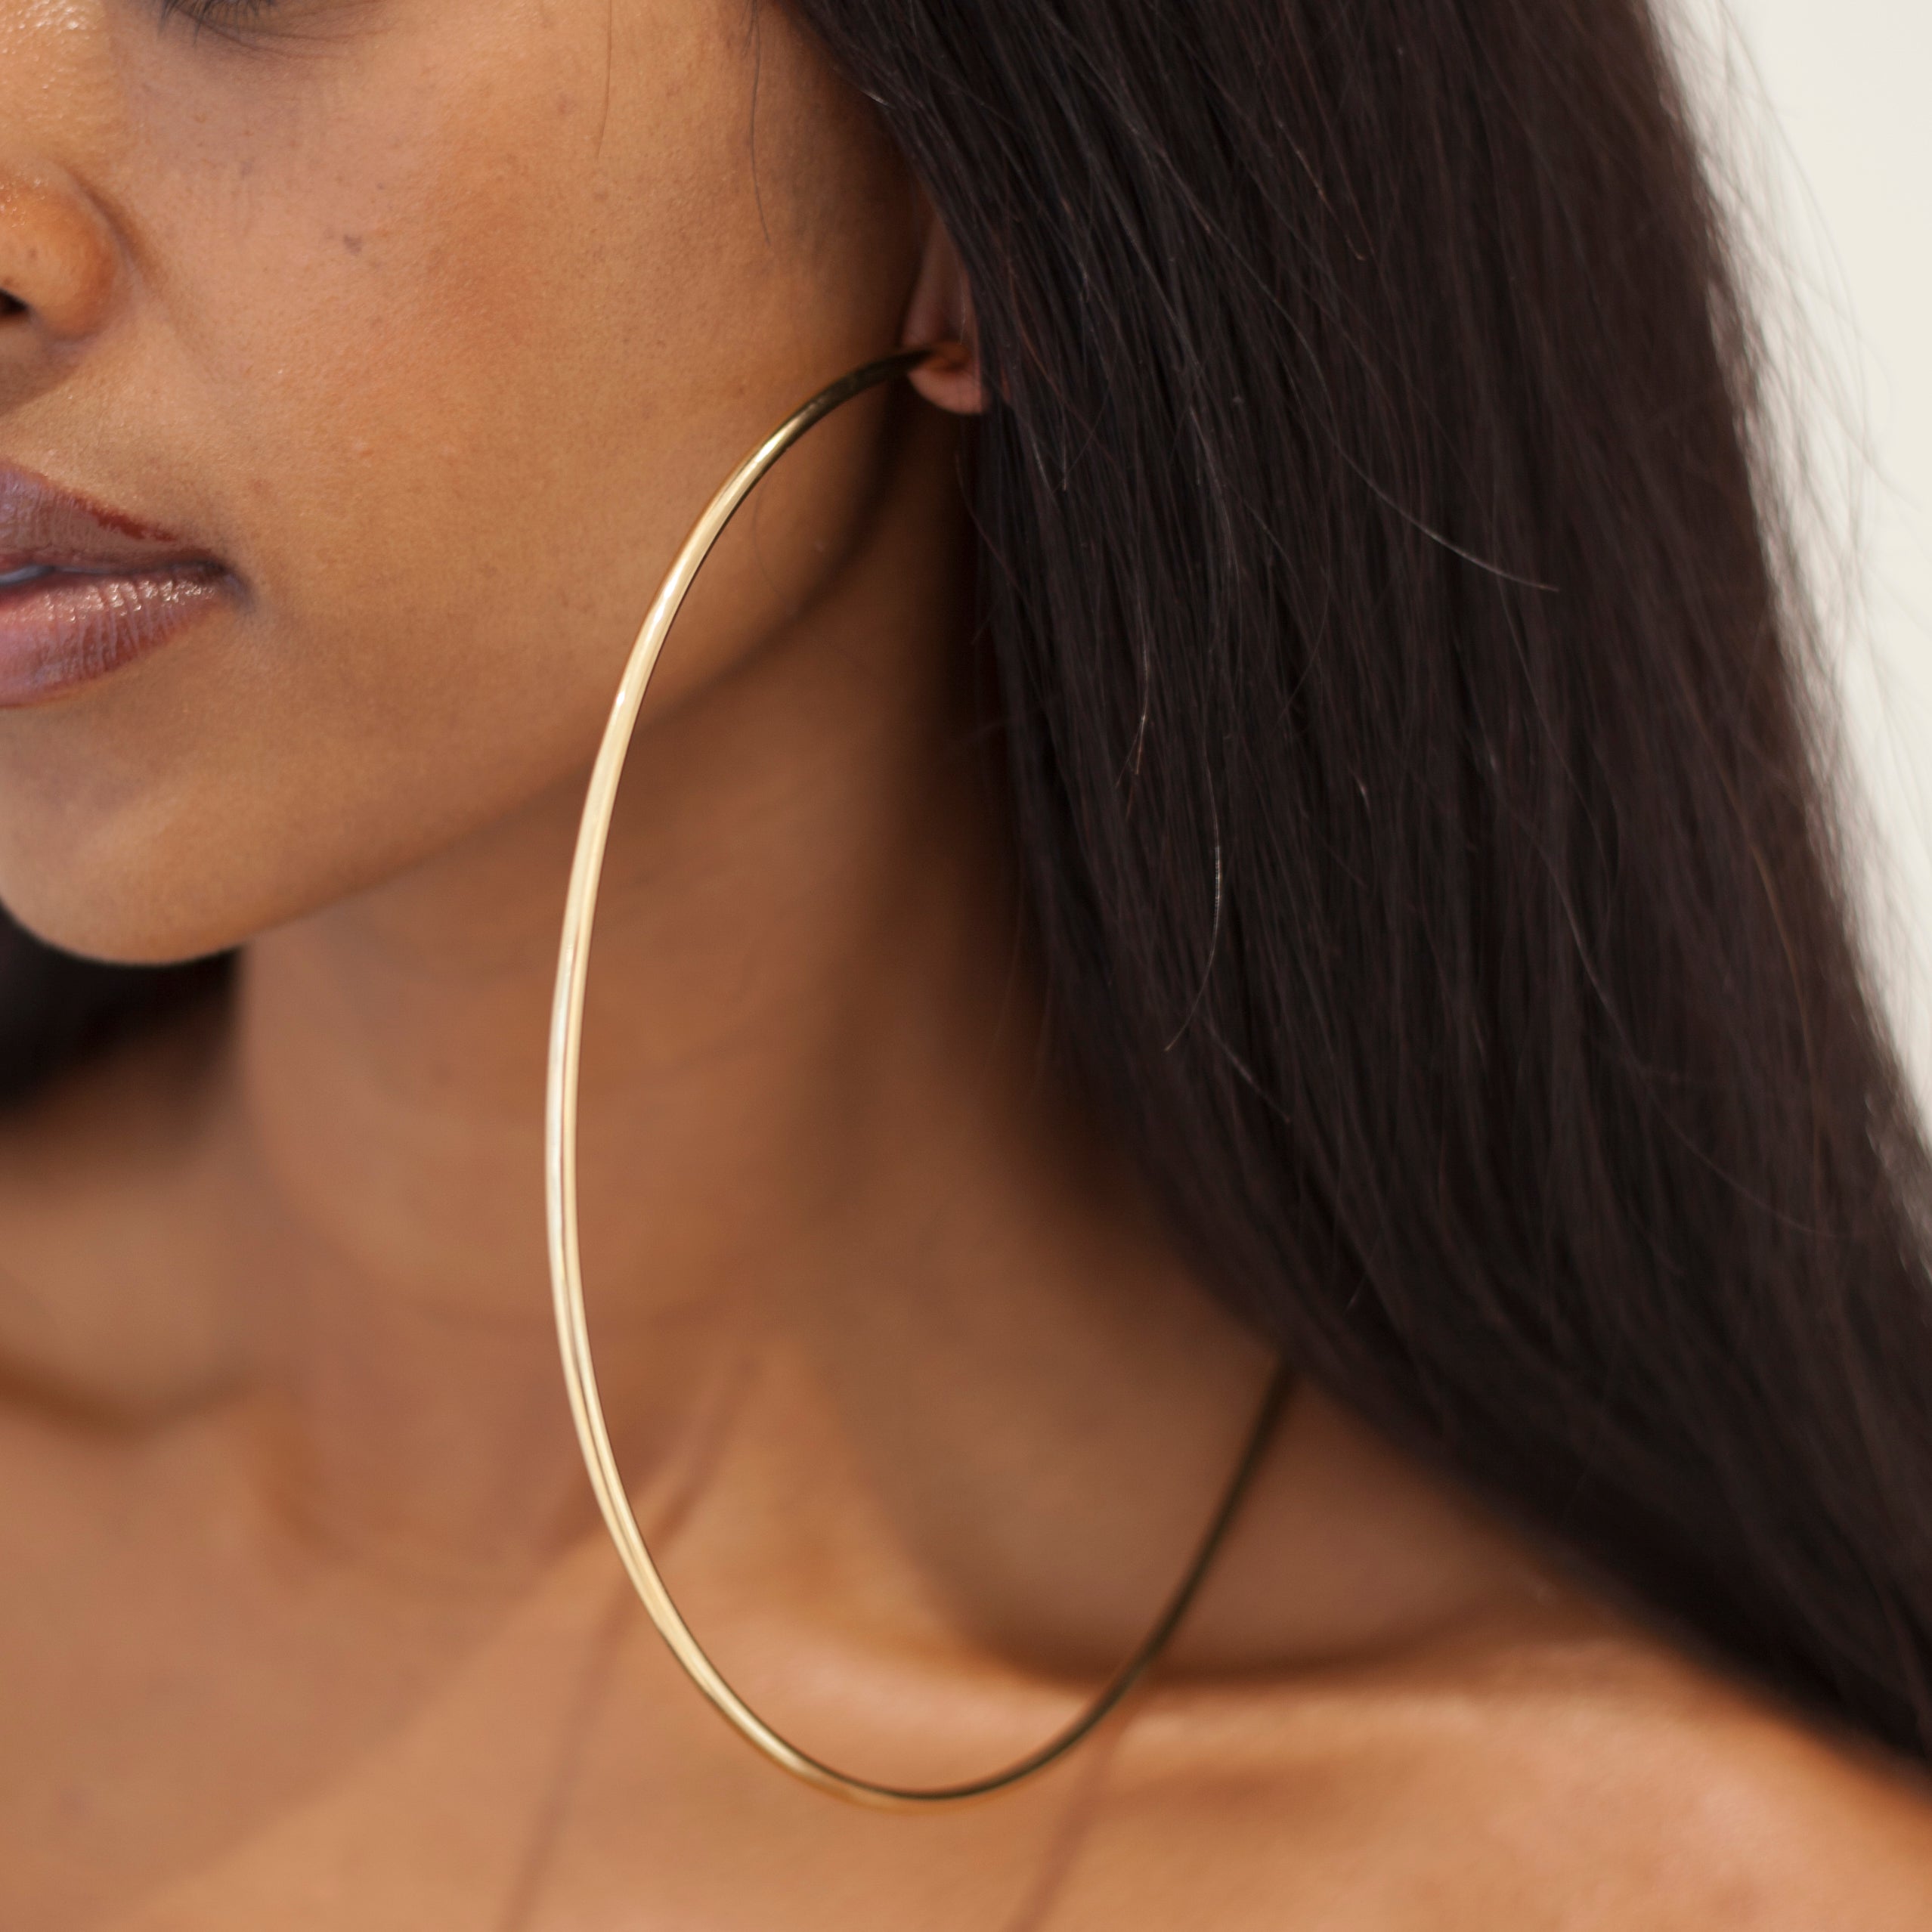 Oversized statement hoops in gold